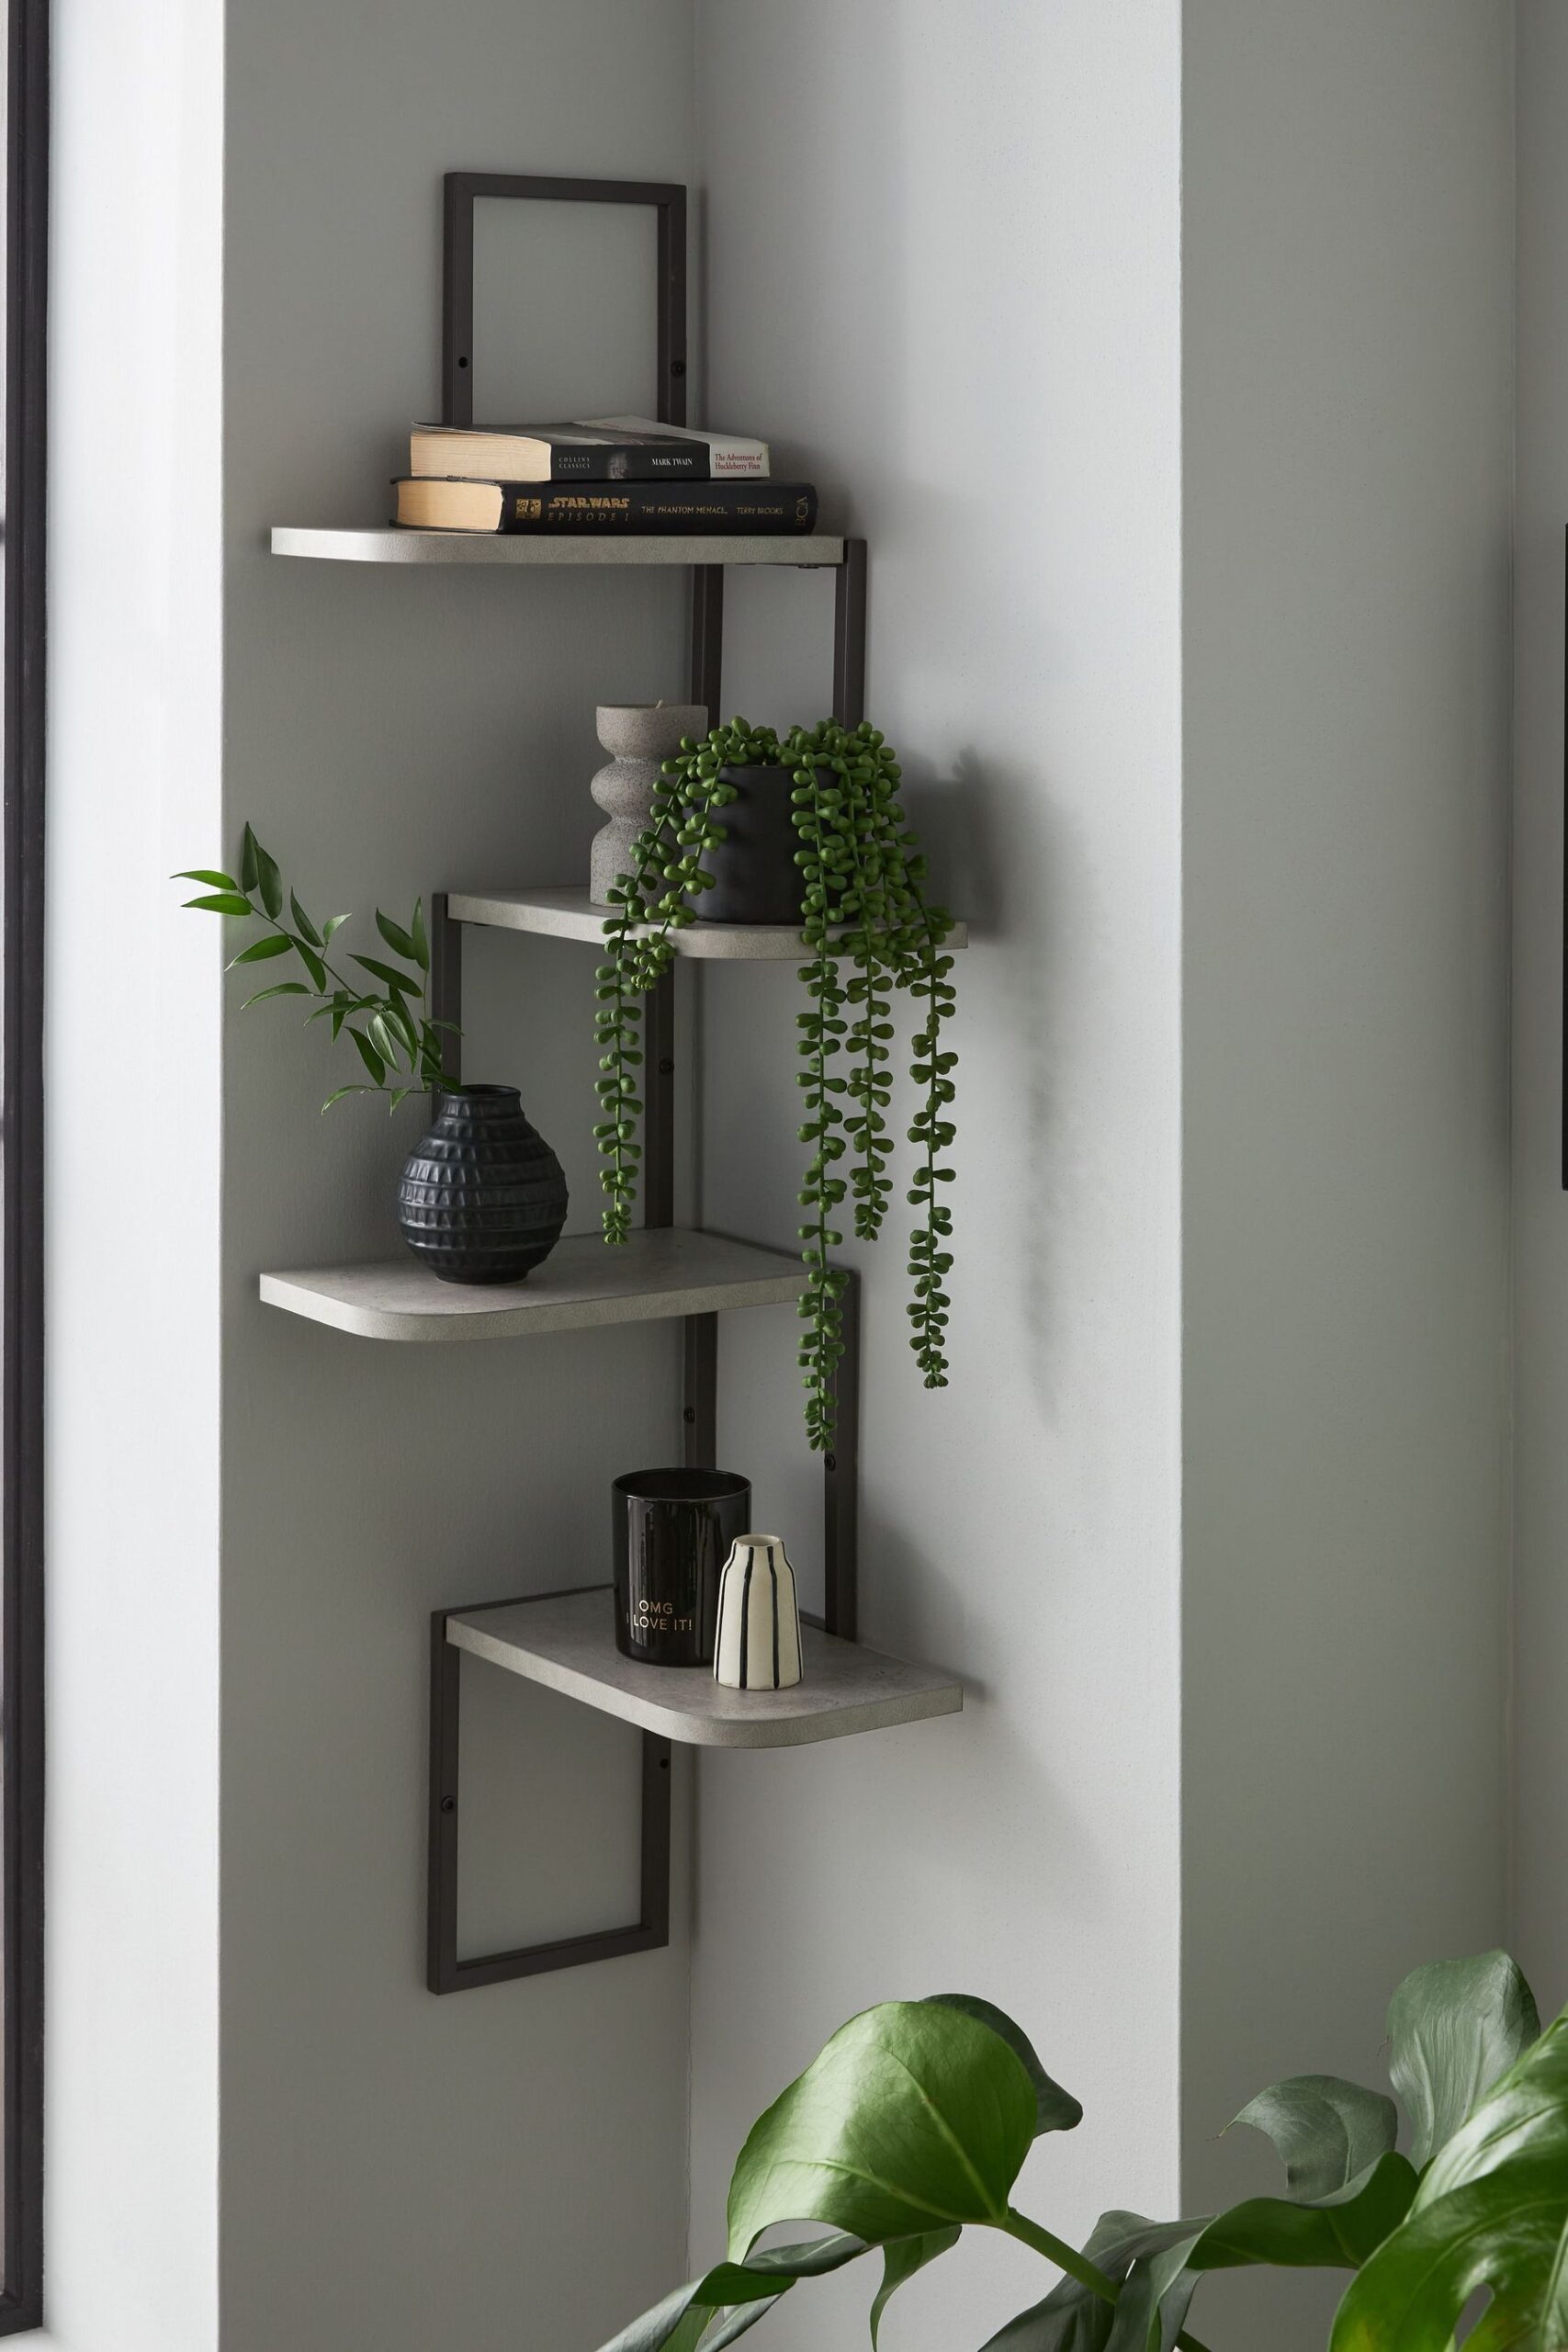 Creative Ways to Use Wall Shelving Units
in Your Home